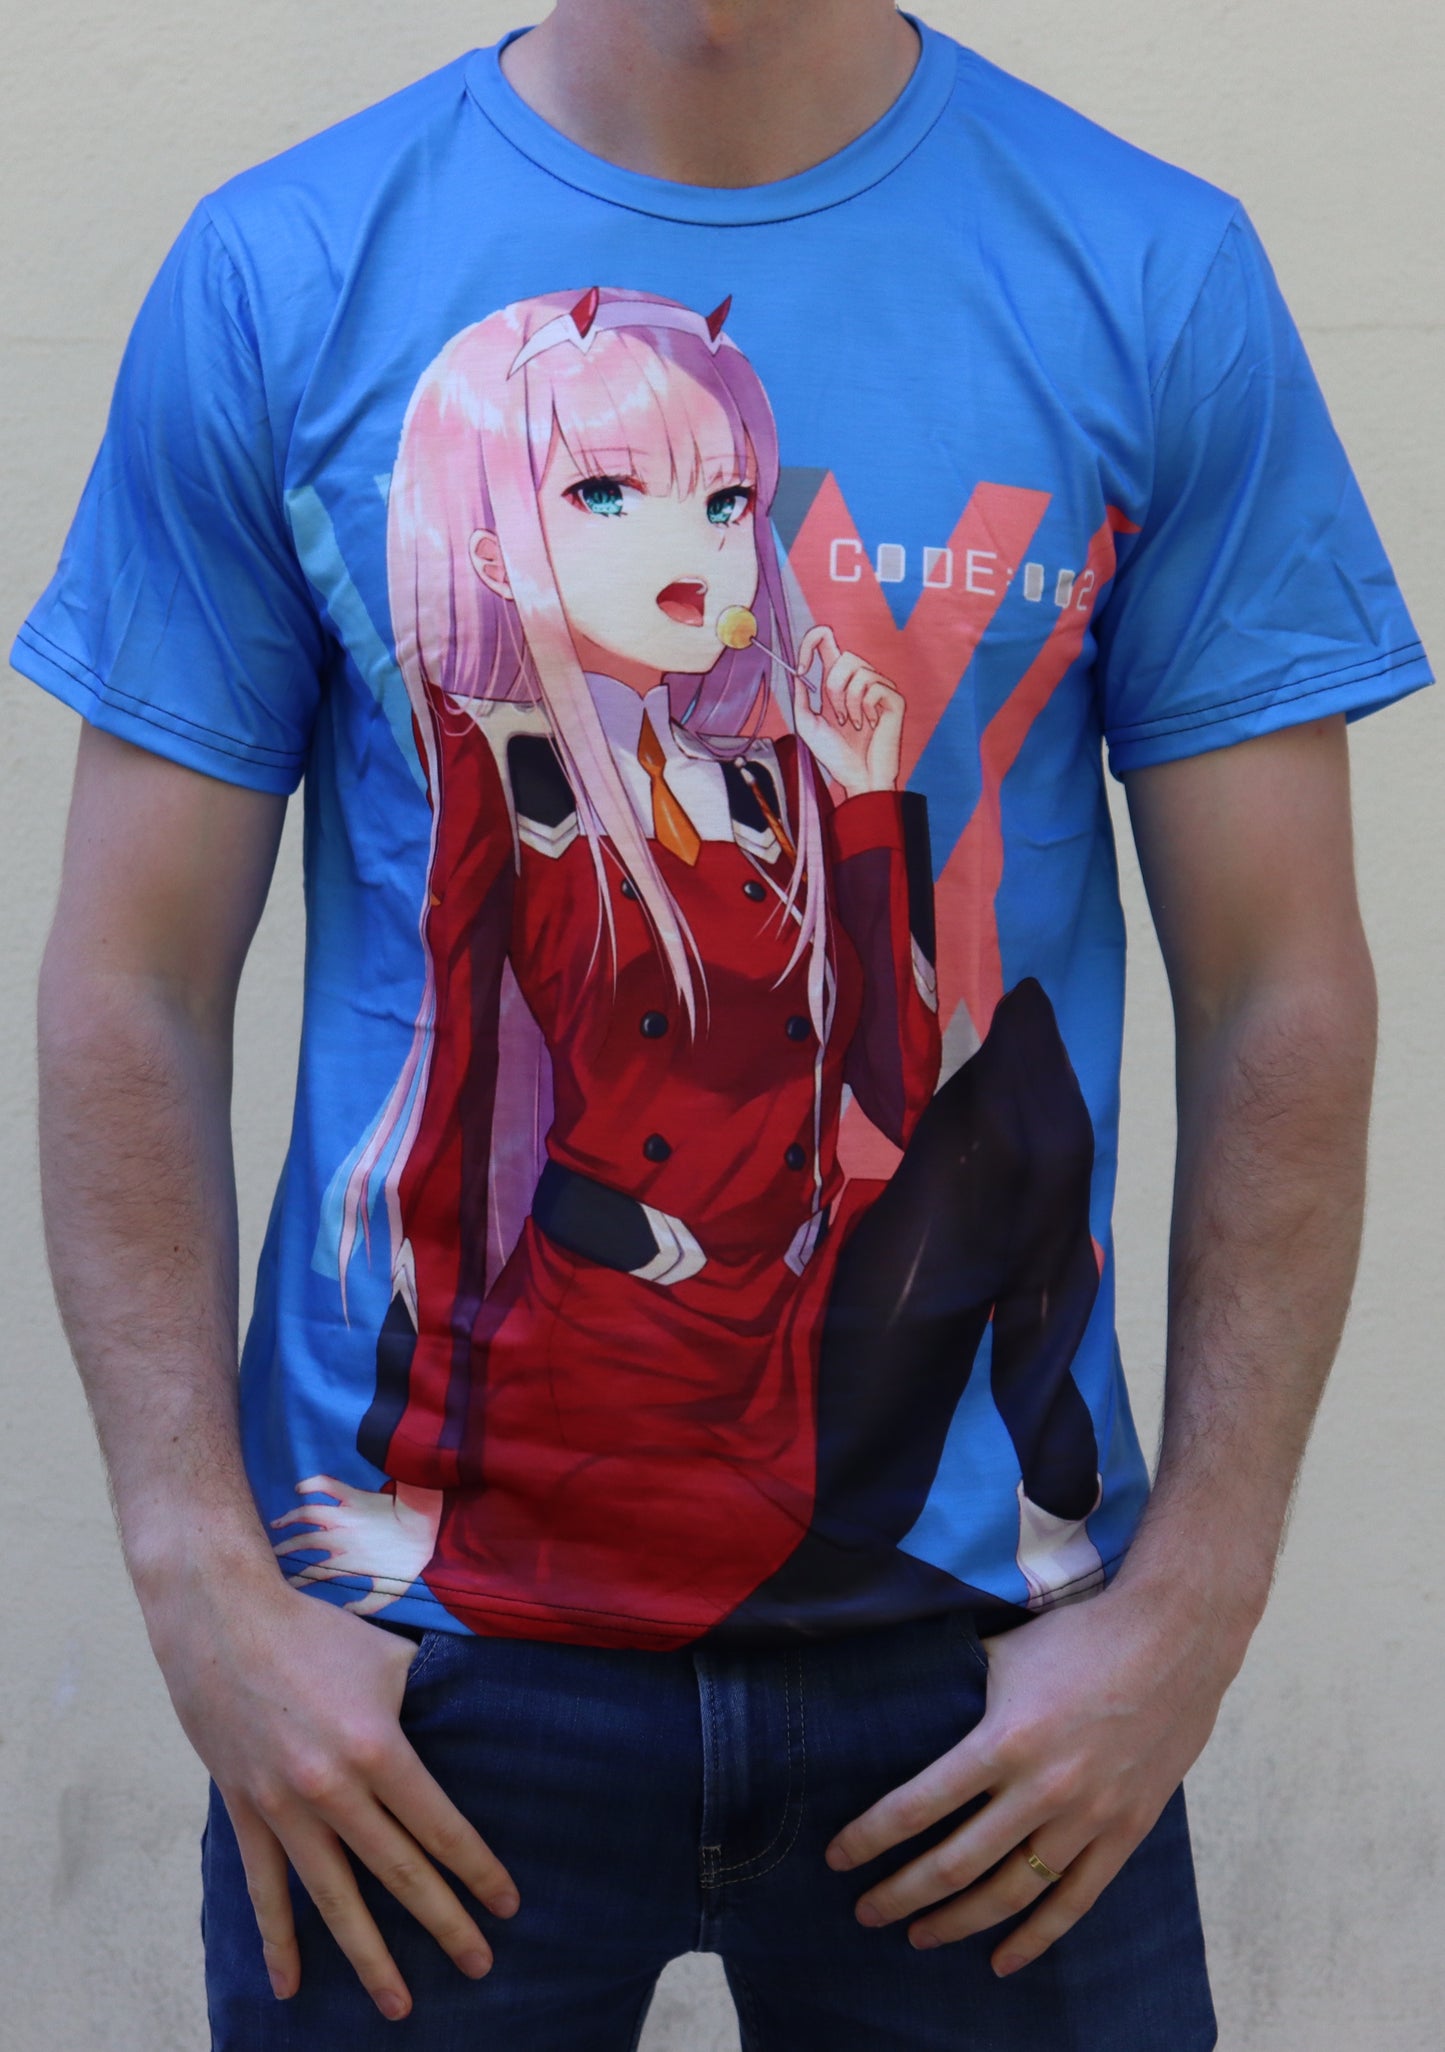 Darling In The Franxx - Zero Two TShirt (Price Does Not Include Shipping - Please Read Description)